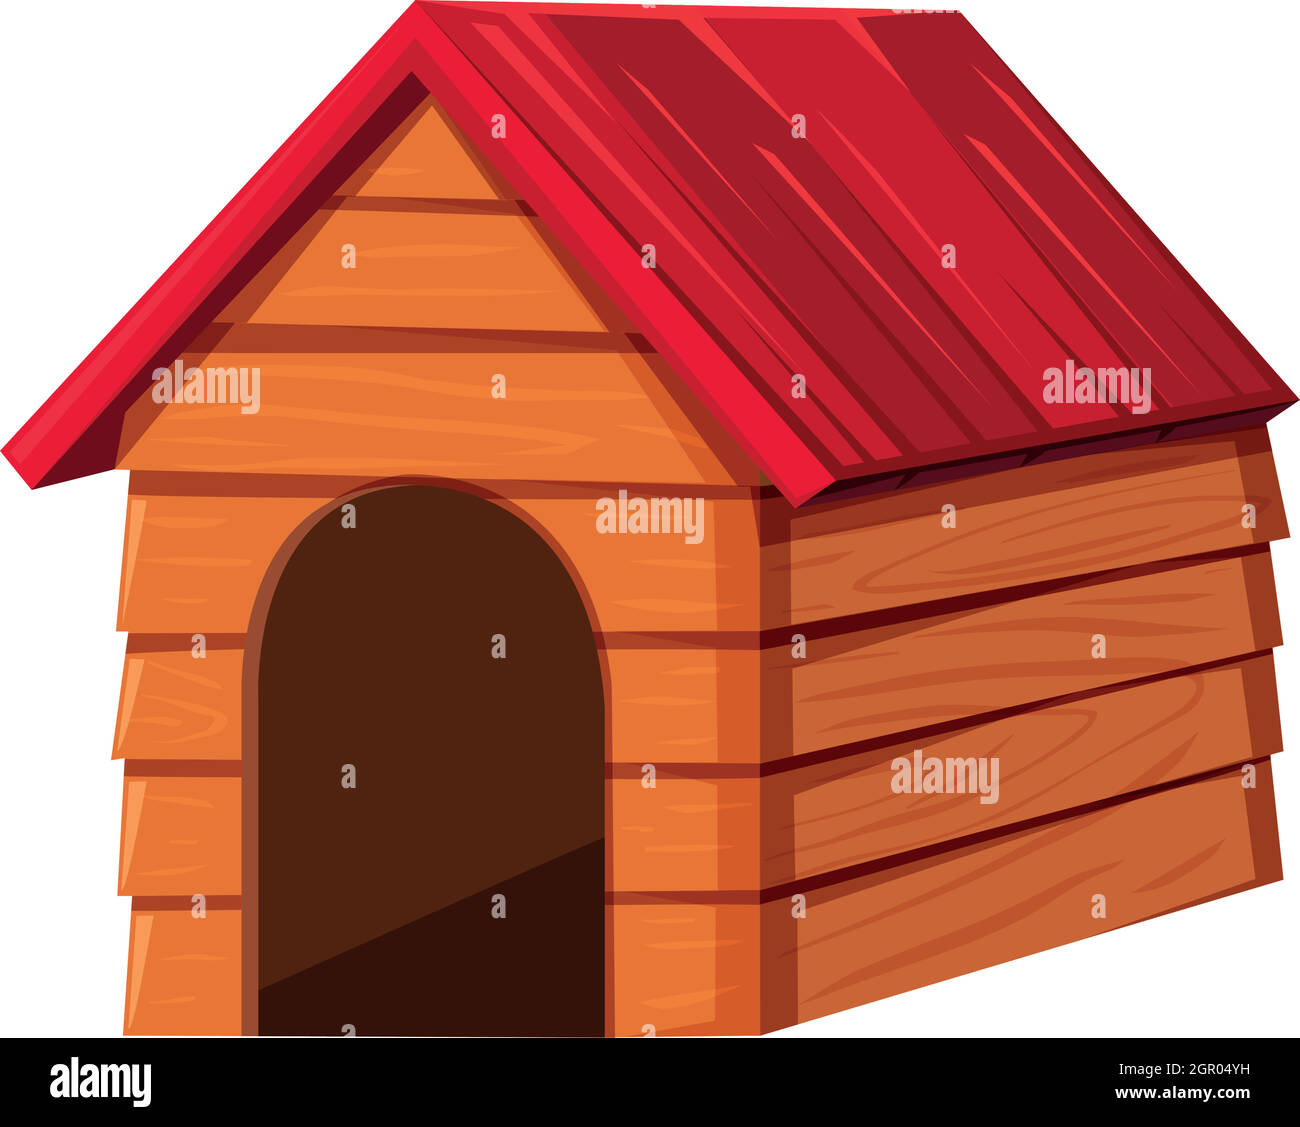 red dog house clipart